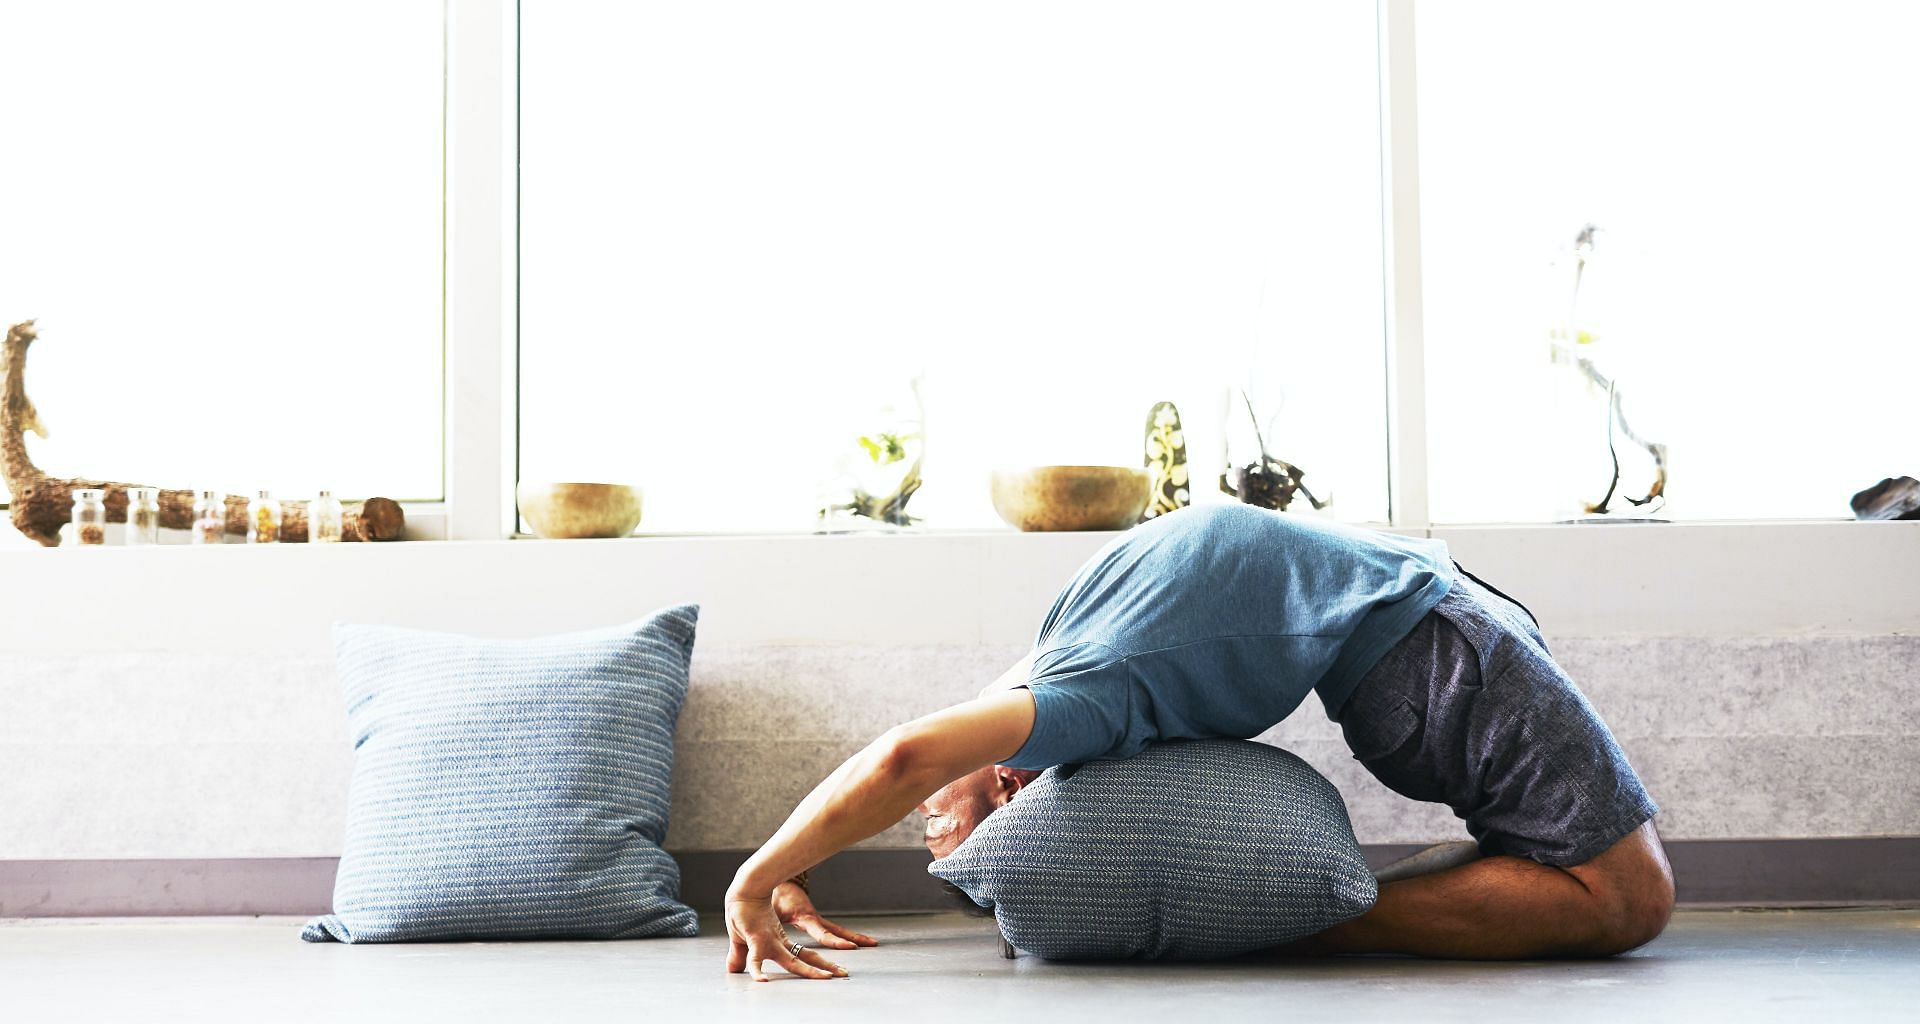 A Restorative Yoga Sequence for Tight Spaces